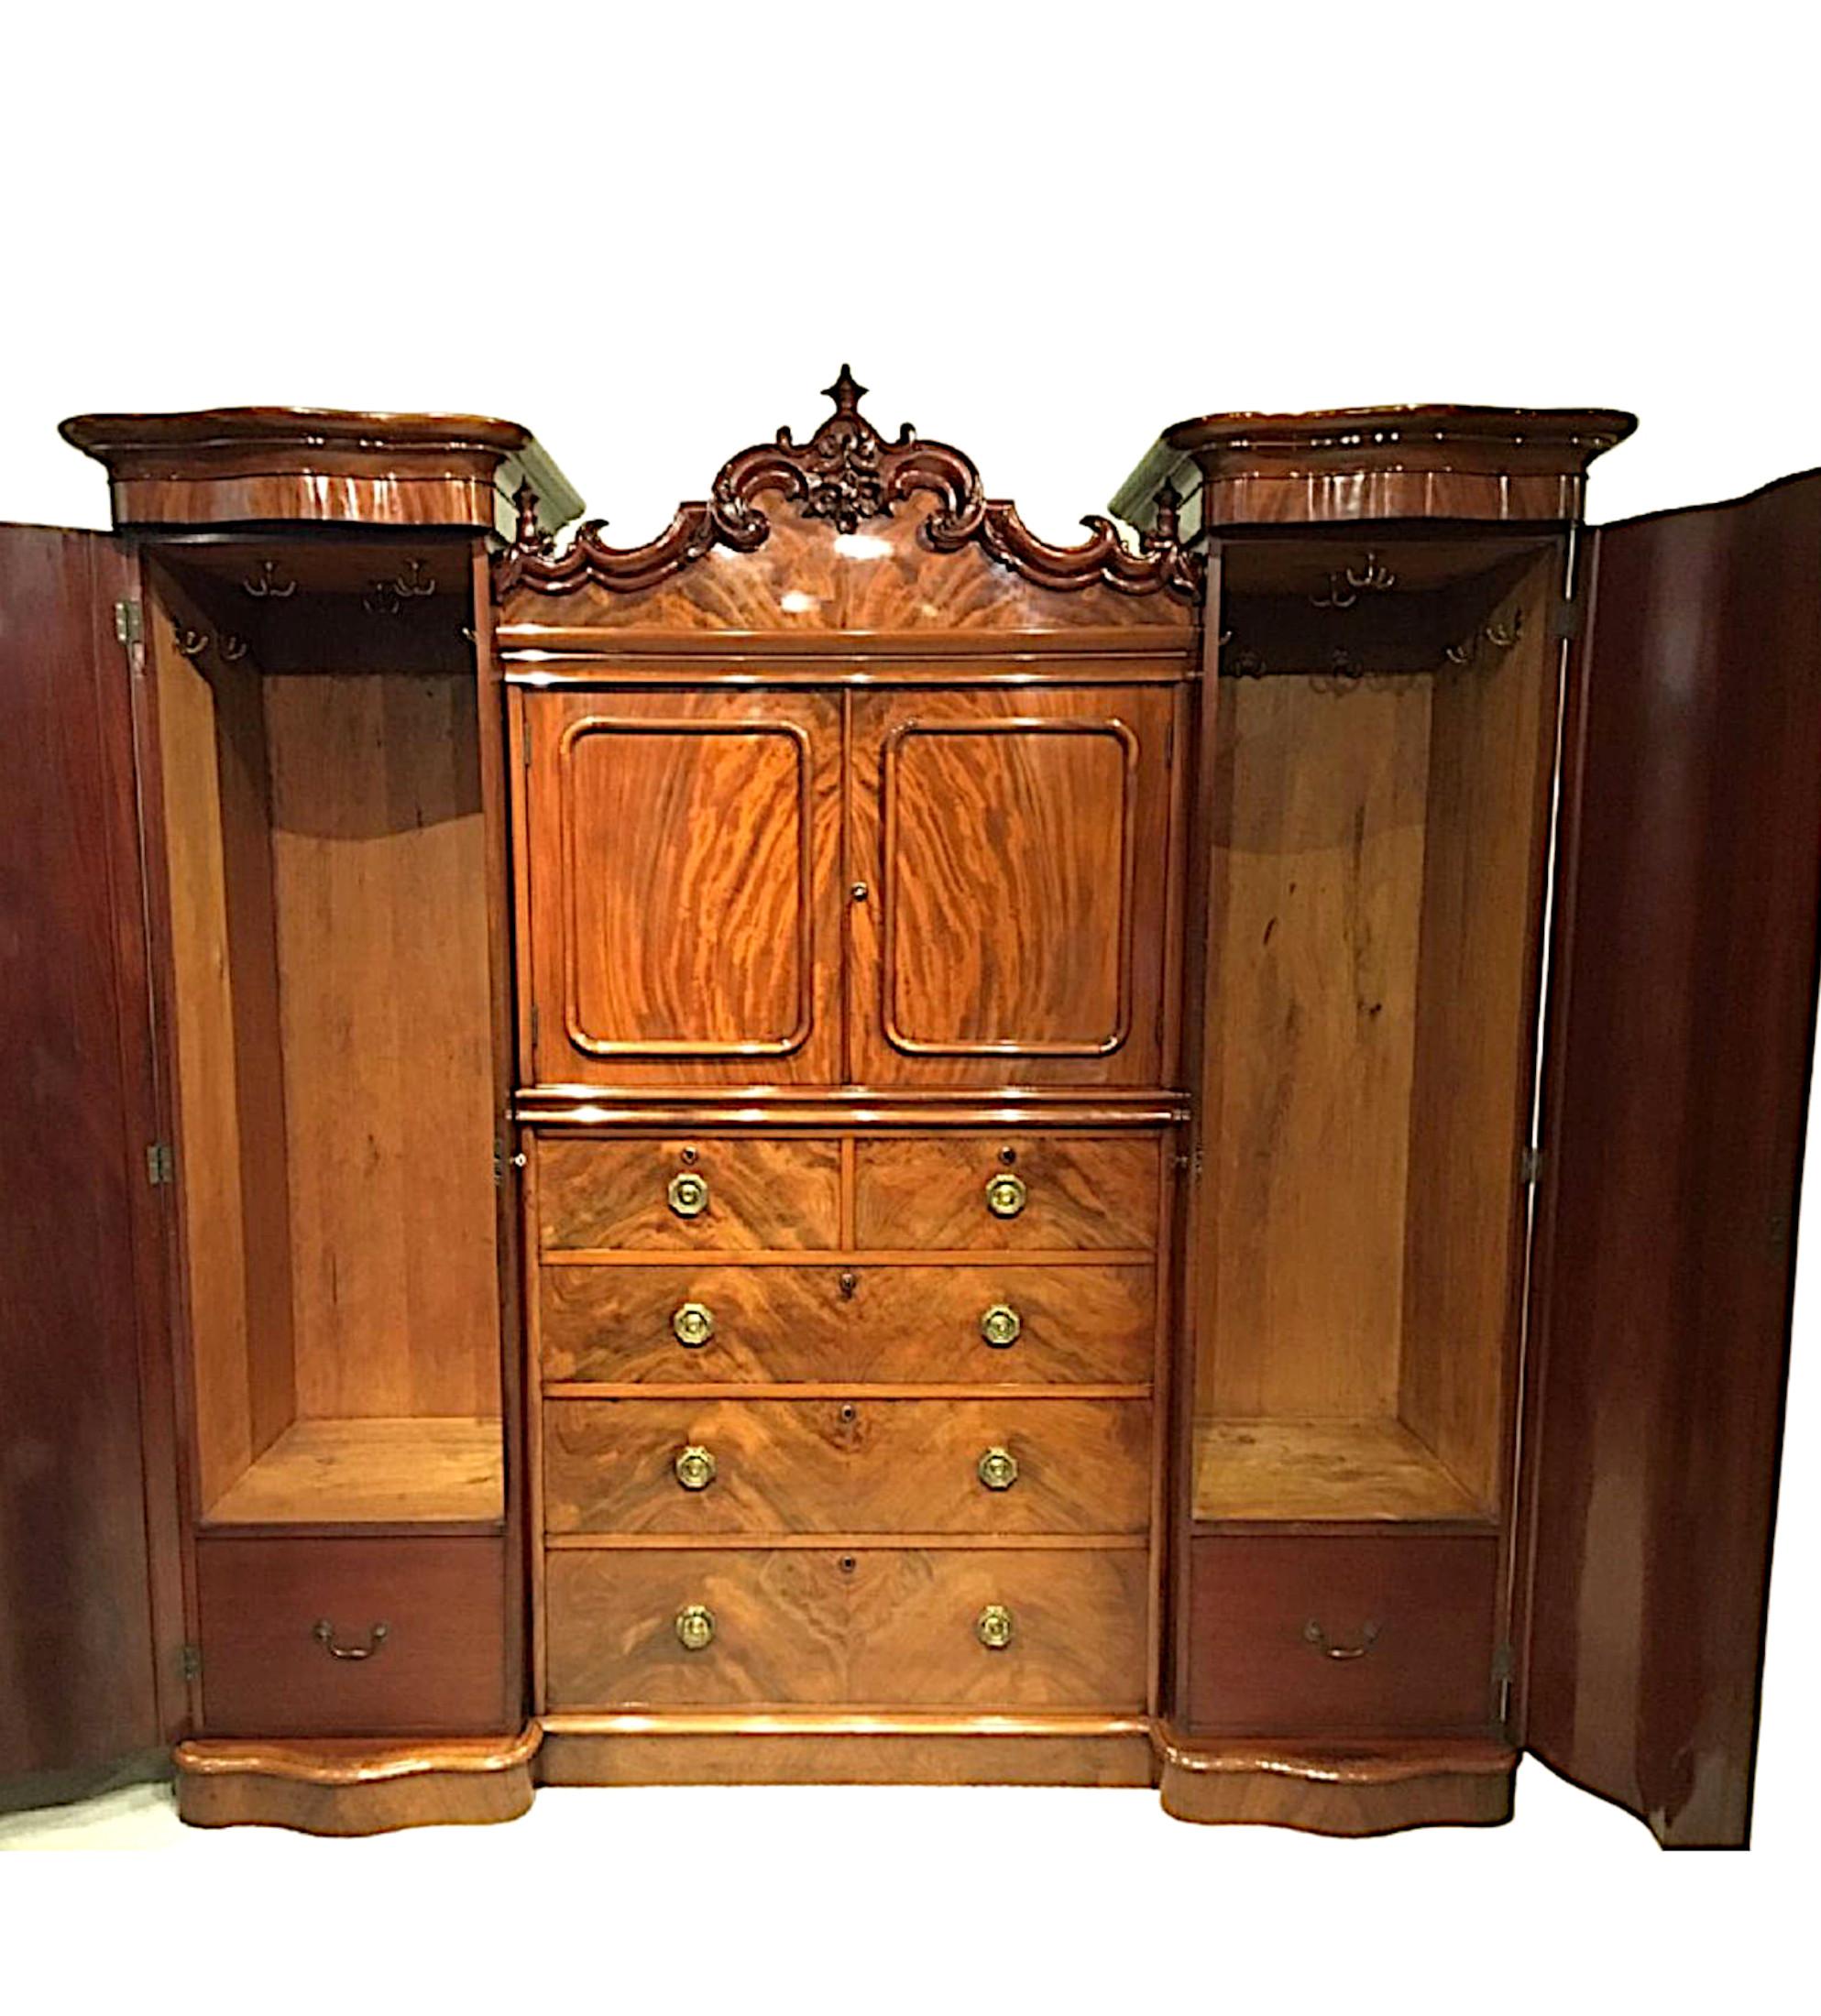 A very rare 19th Century flame mahogany wardrobe The central section with a beautifully ornate arched top adorned with finely carved foliate, finial and c - scroll decorative motifs, raised above two moulded panelled doors, opening to reveal shelved